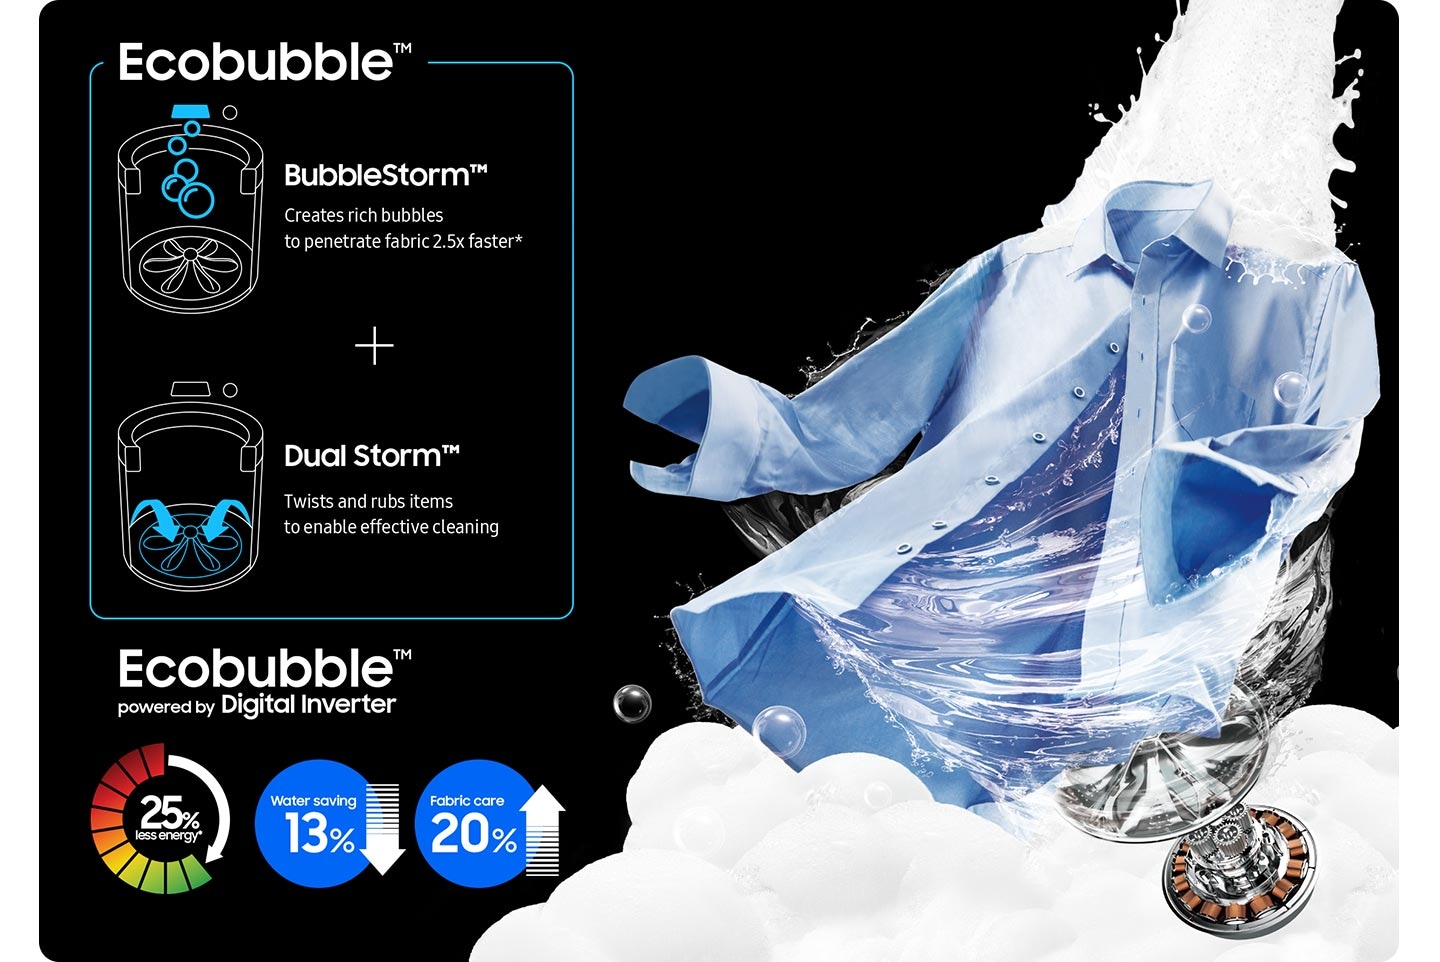 Powerful water flow, foam, and Digital Inverter motor technology wash a blue shirt. Bubblestorm™ creates concentrated bubbles to penetrate fabric 2.5 times faster* and Dual Storm™ wrings and rubs items to effectively clean. Ecobubble™ is powered by Digital Inverter. Save 60% energy, 11% water and take care of clothes 20% better.